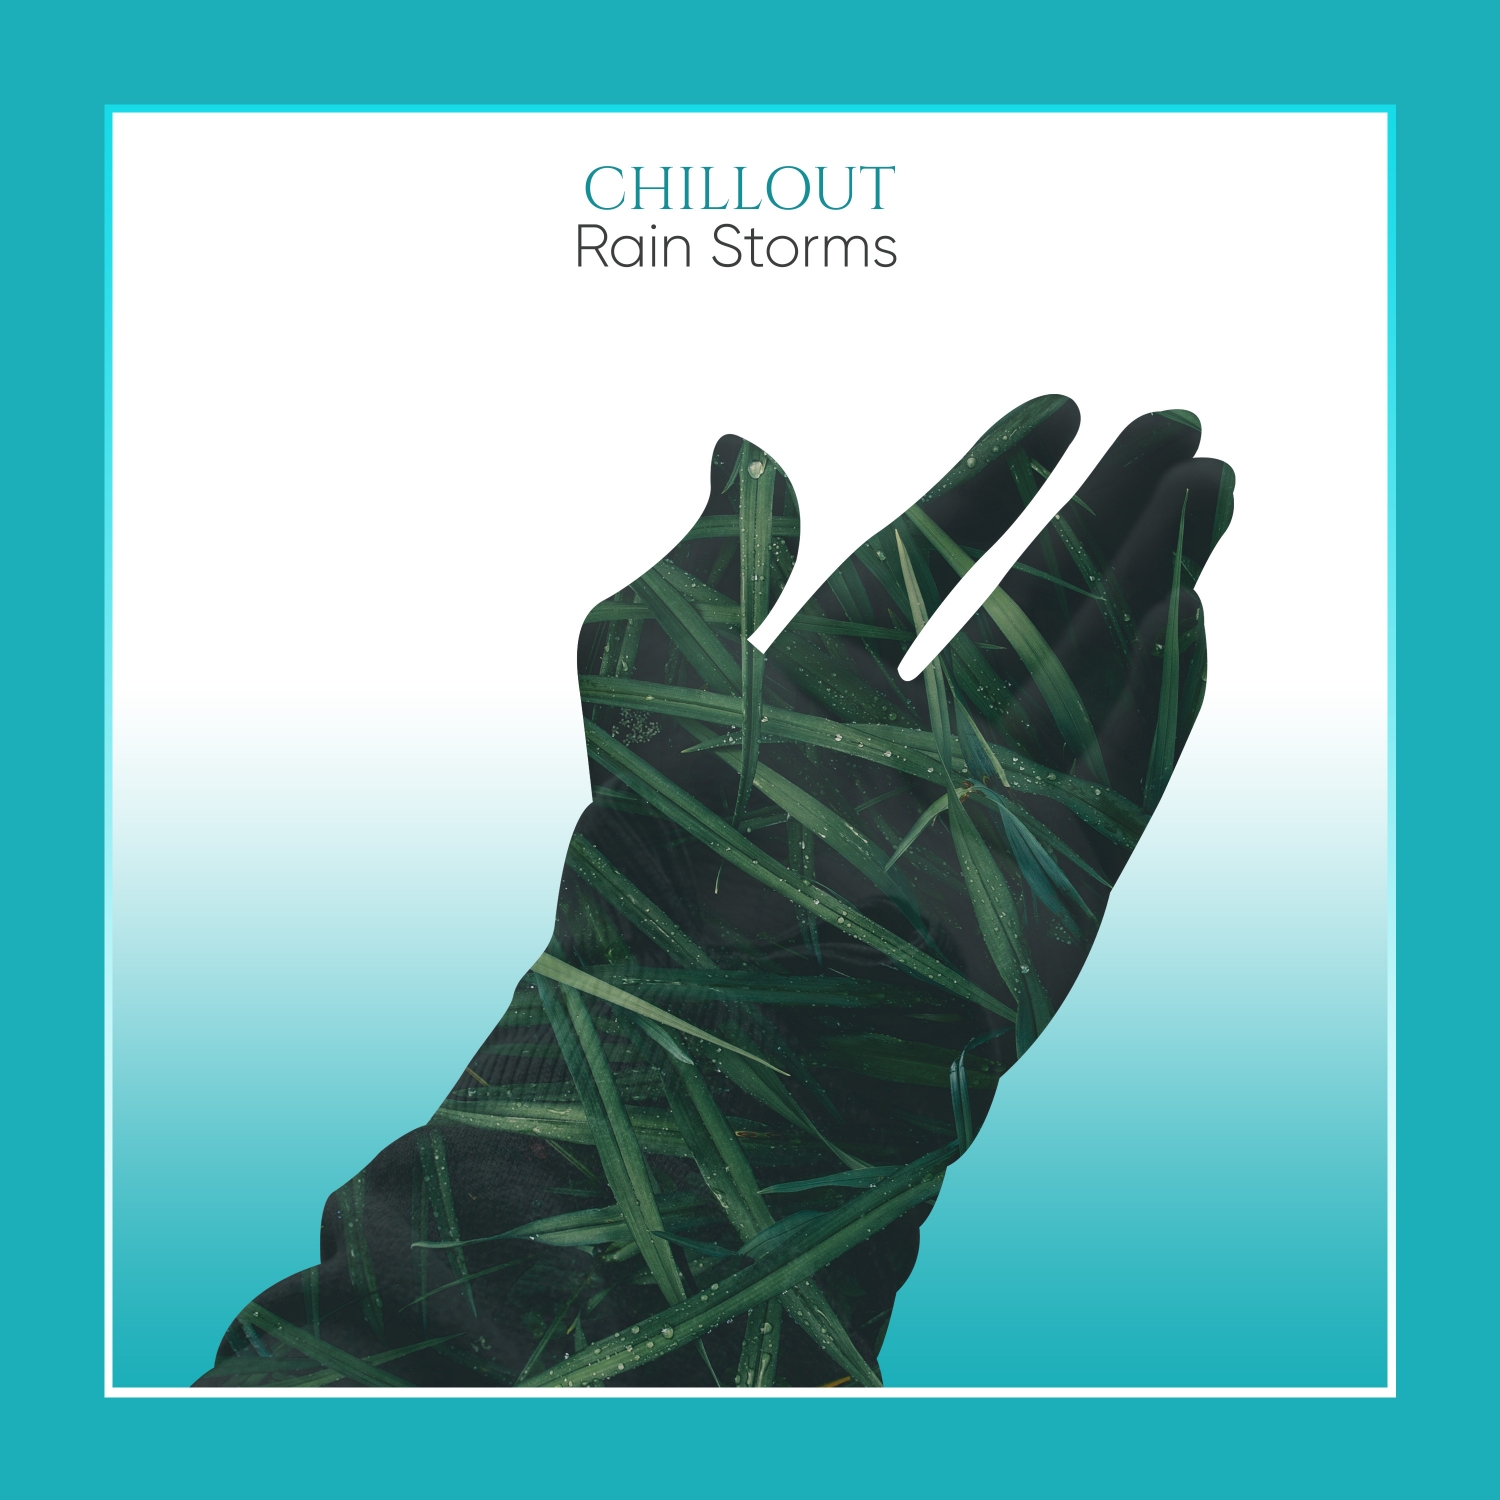 10 Chillout Rain Storms for Sleeping